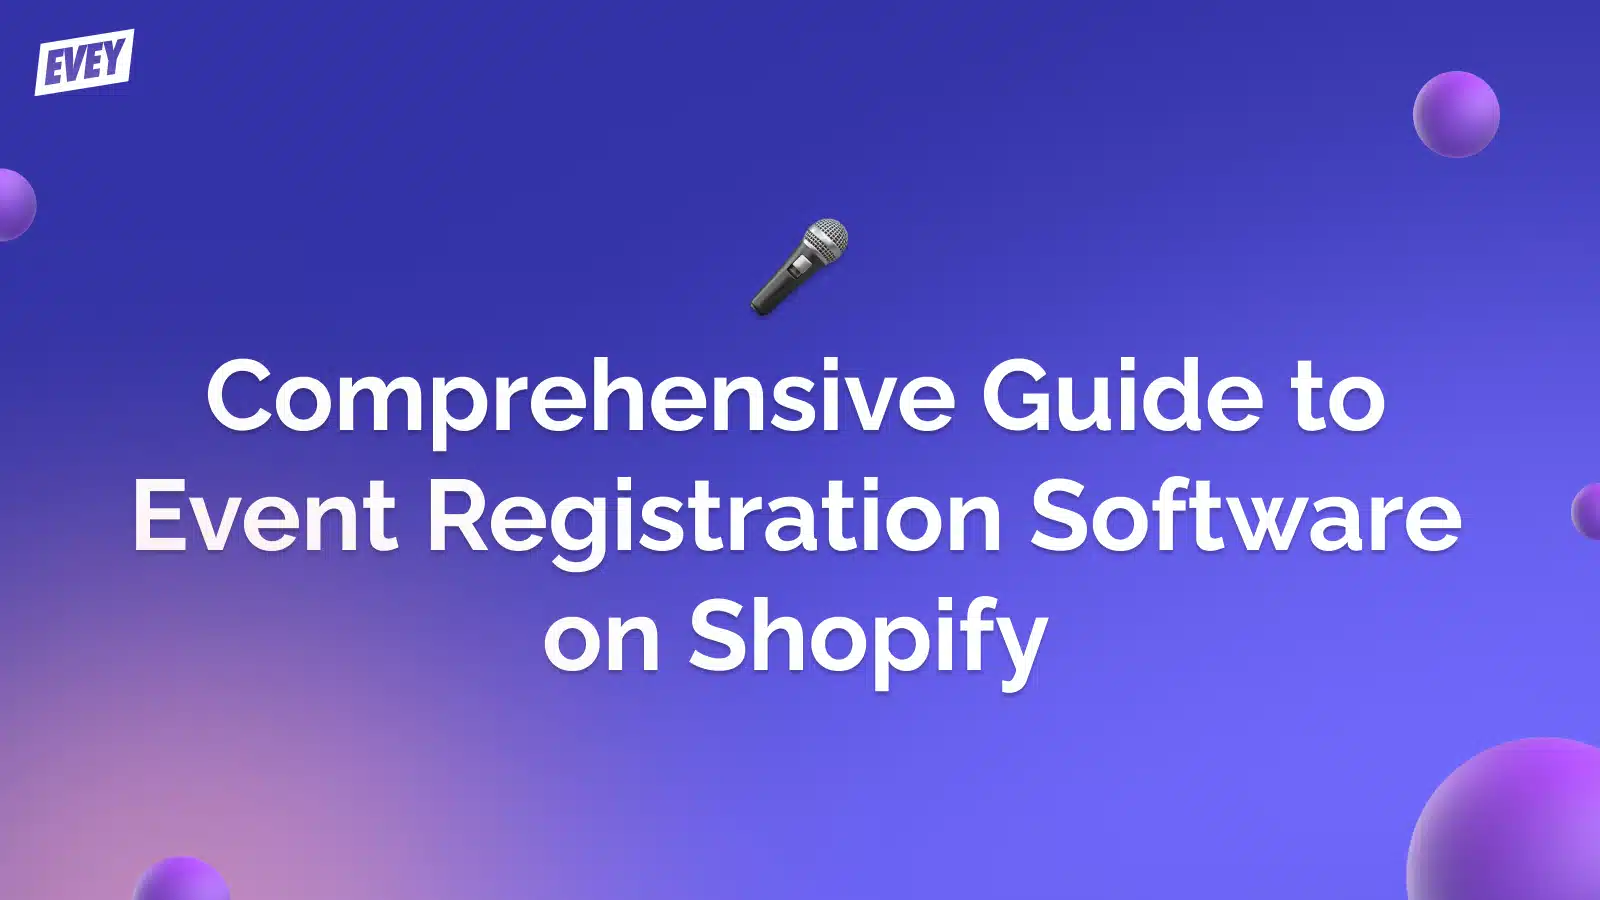 A Comprehensive Guide to Event Registration Software on Shopify